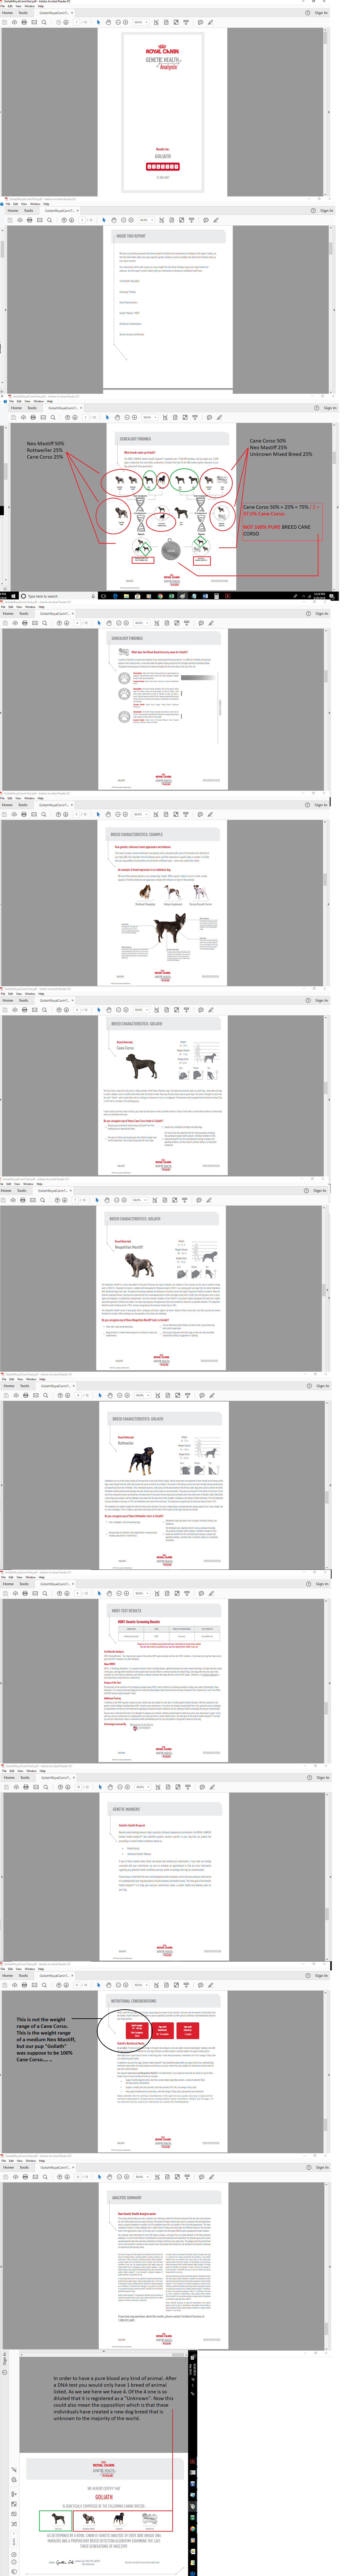 Edited notes onto Royal Canin DNA Test Results